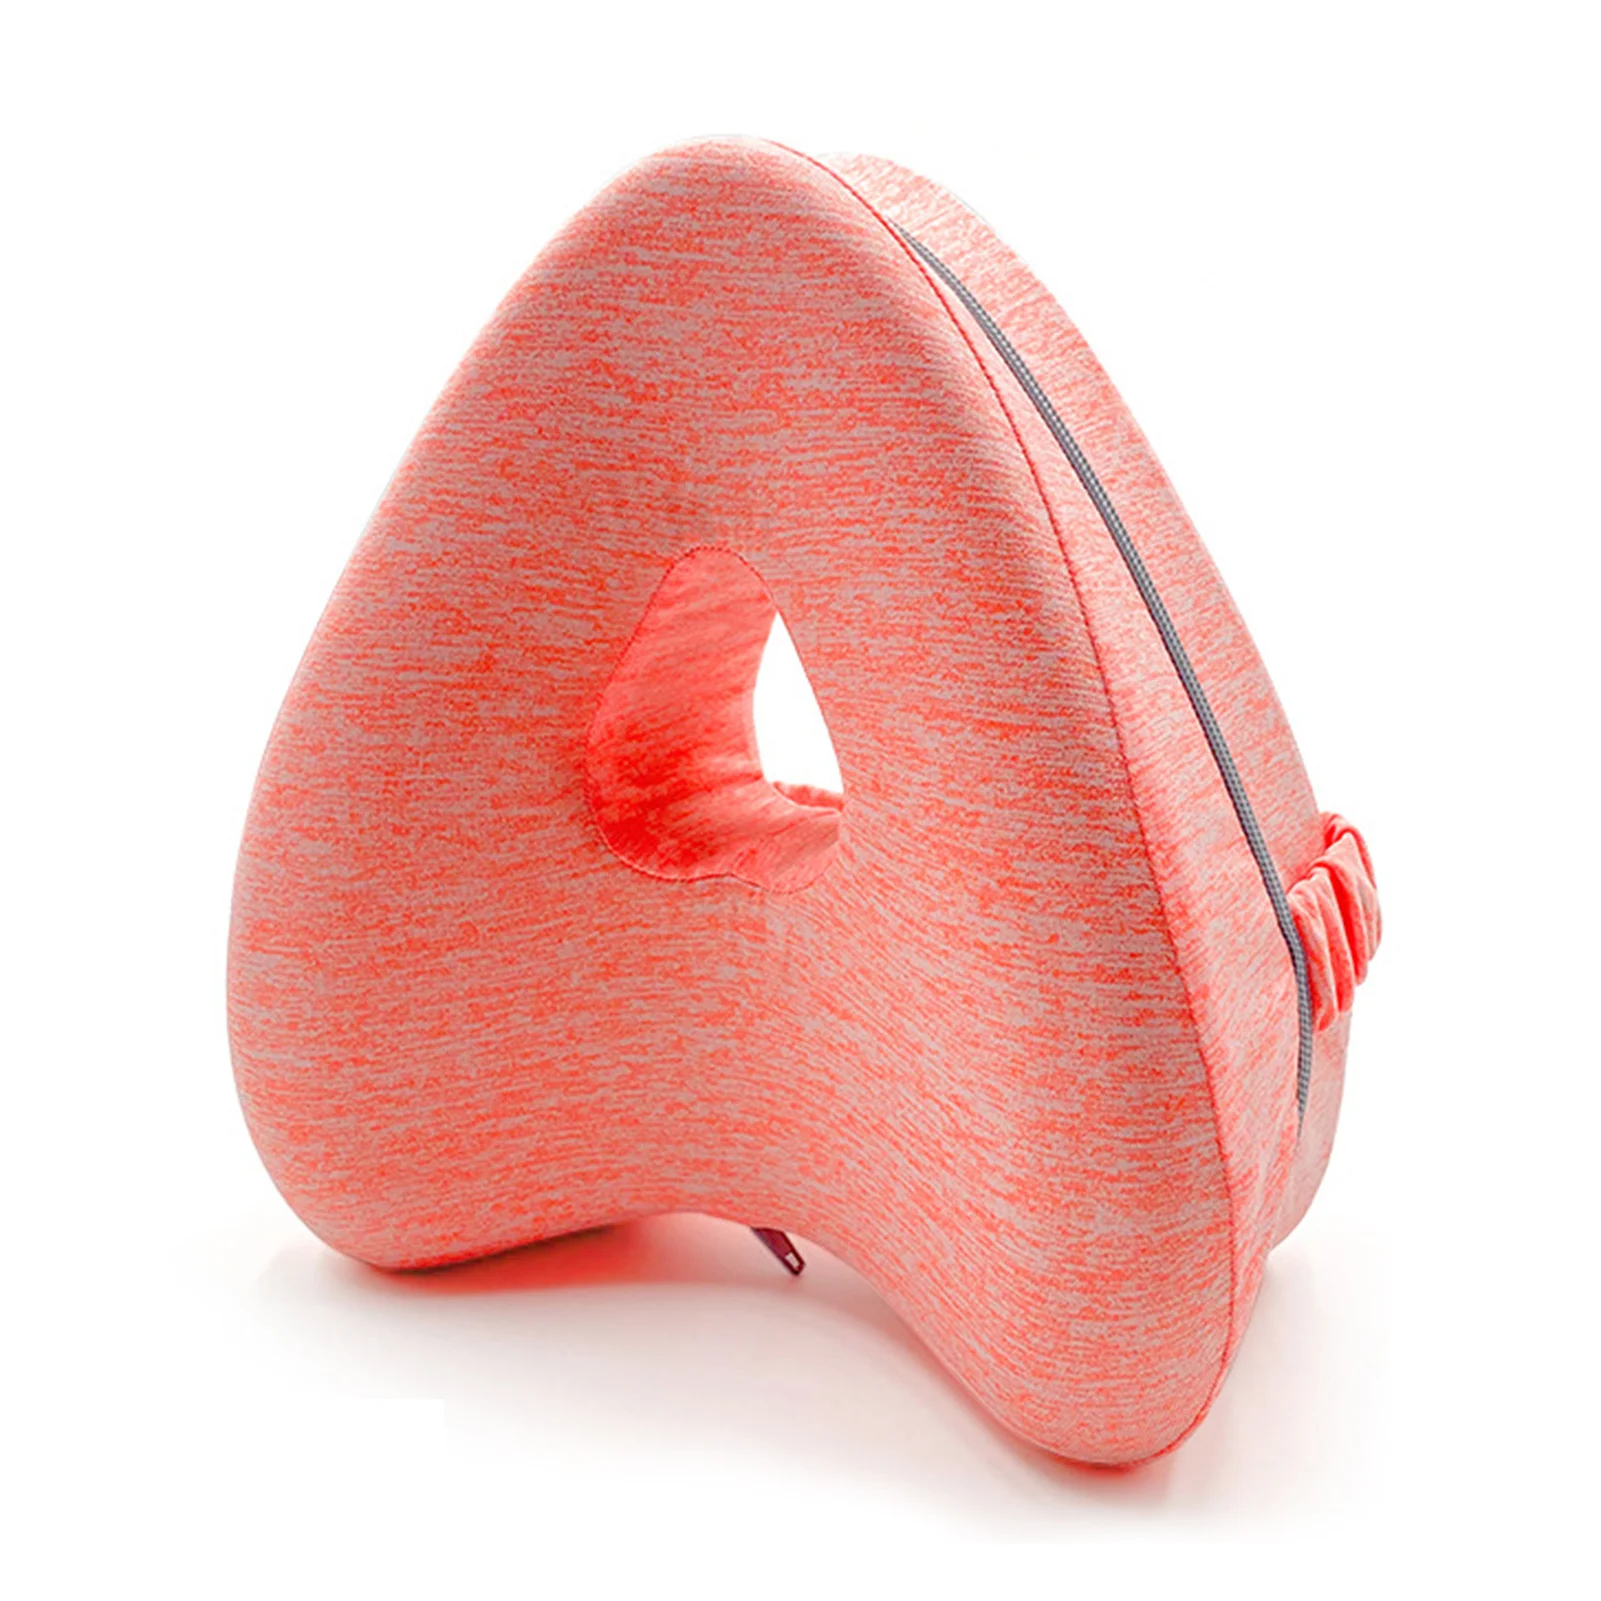 Smoothly Spine Alignment Pillow Relieve Hip Pain Sciatica Pillow